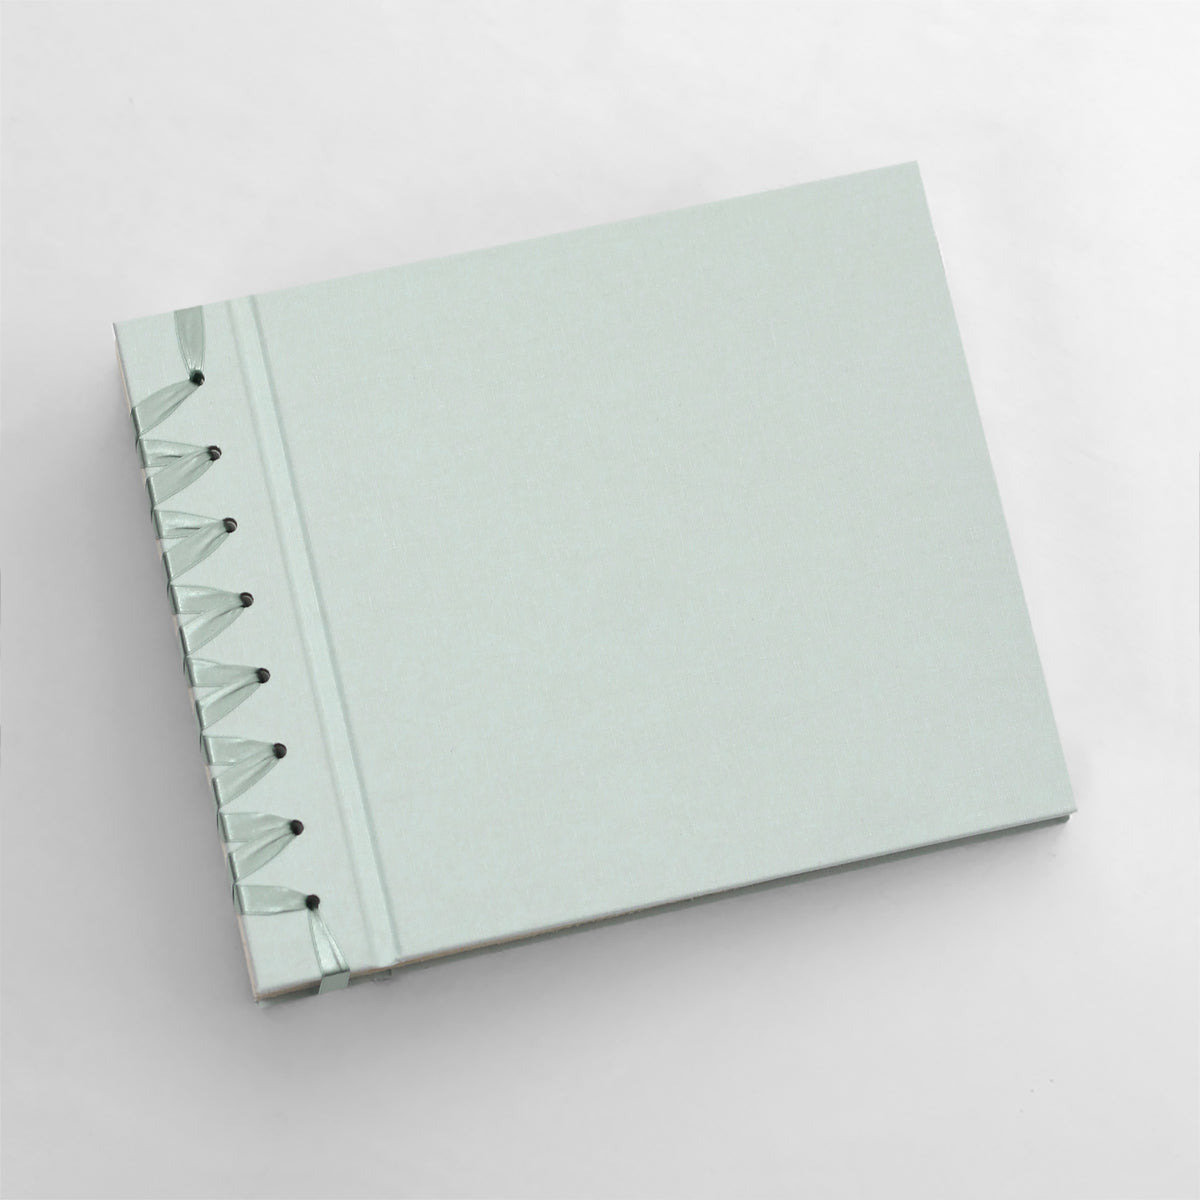 Small Paper Page Album with Pastel Blue Cotton Cover